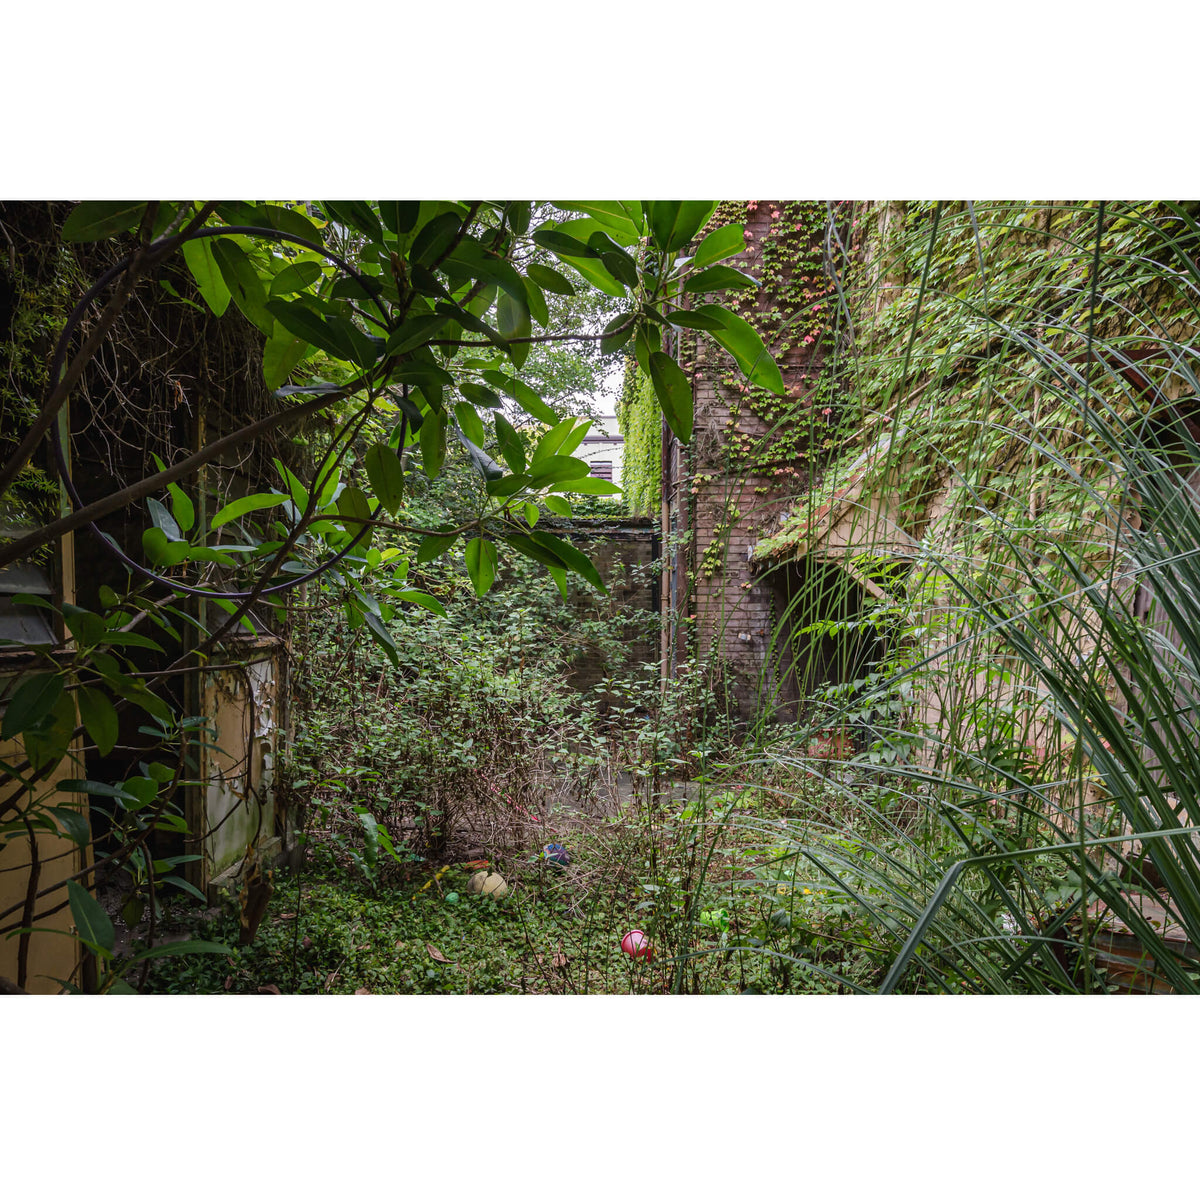 Nature Always Finds A Way | Terminus Hotel Fine Art Print - Lost Collective Shop